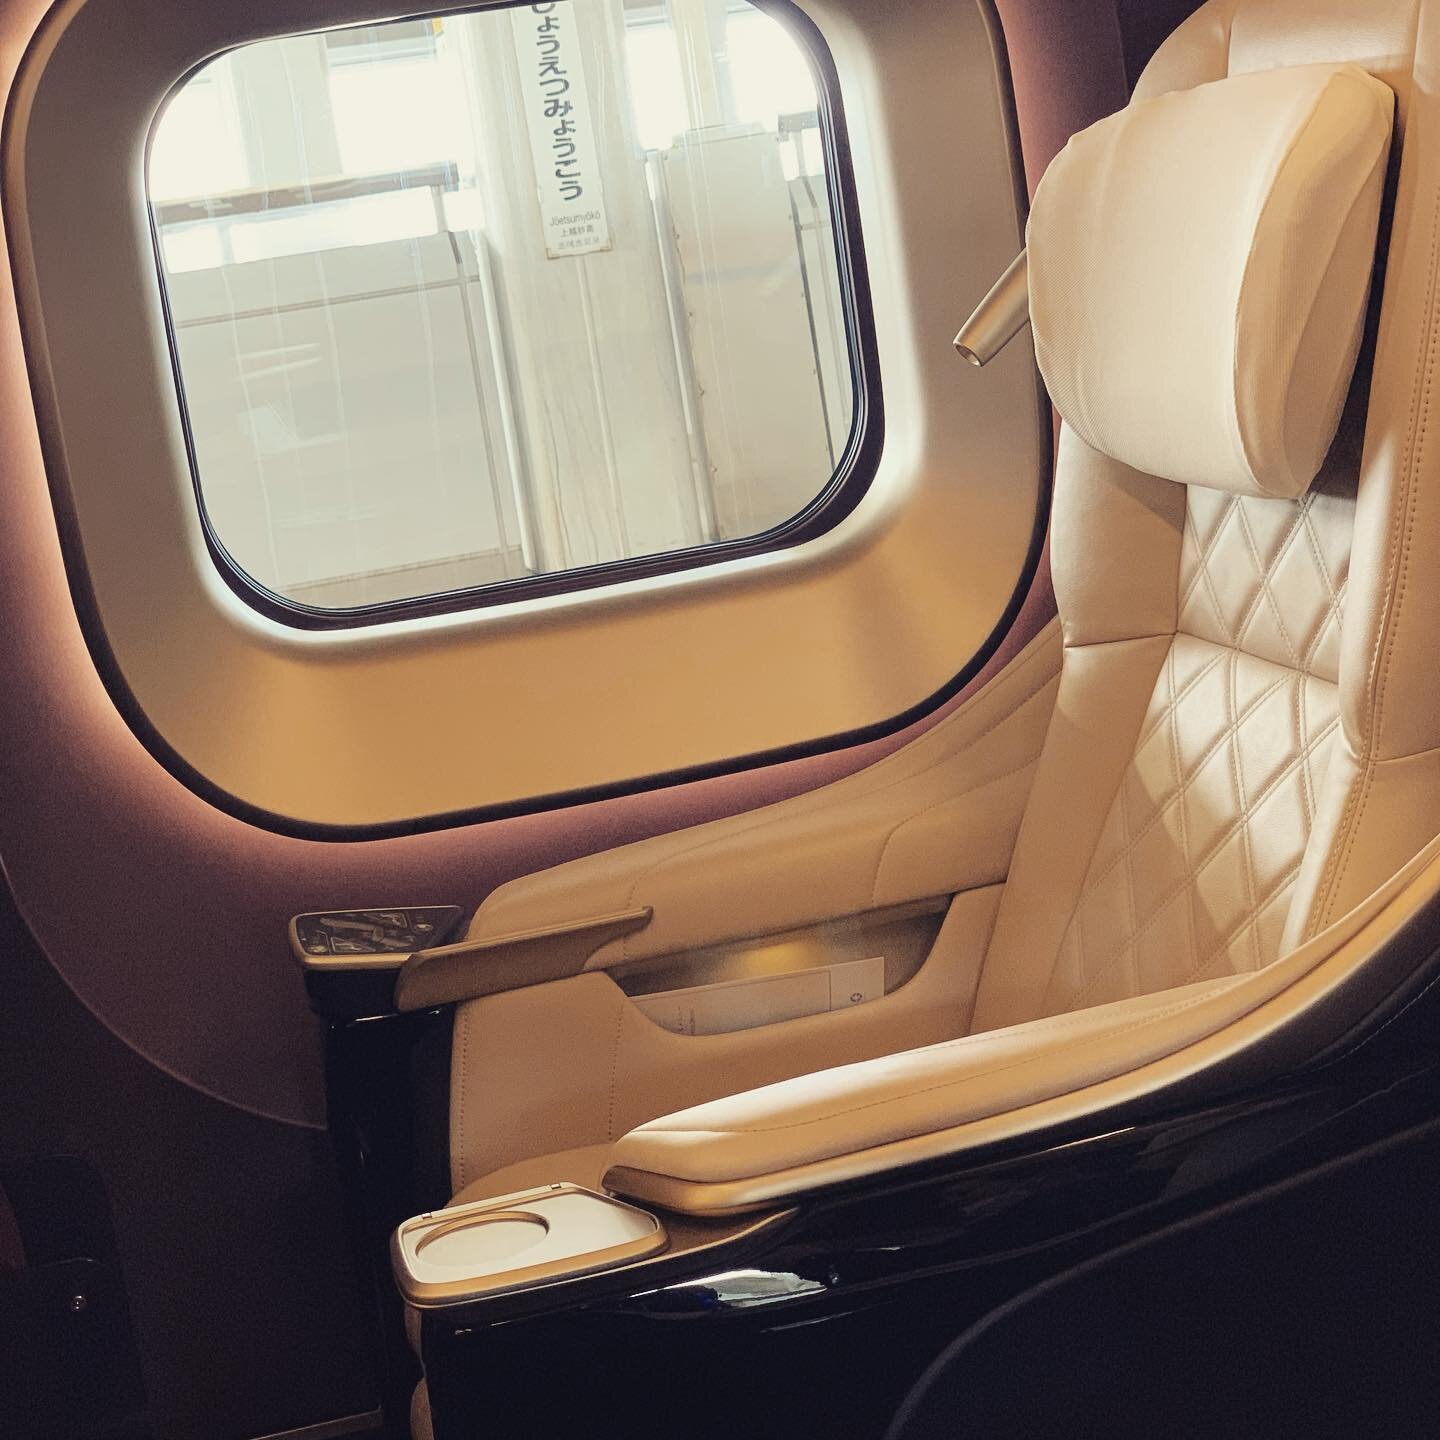 【FIRST CLASS BULLET TRAIN】a lot of fun with Luxury train trip to Kanazawa 🚅 free drinks all the way 🍾

●●●
TLS offers round trip to Tokyo Station. We can guide you the most safety and comfortable way to travel outside Tokyo. Your satisfaction is ou